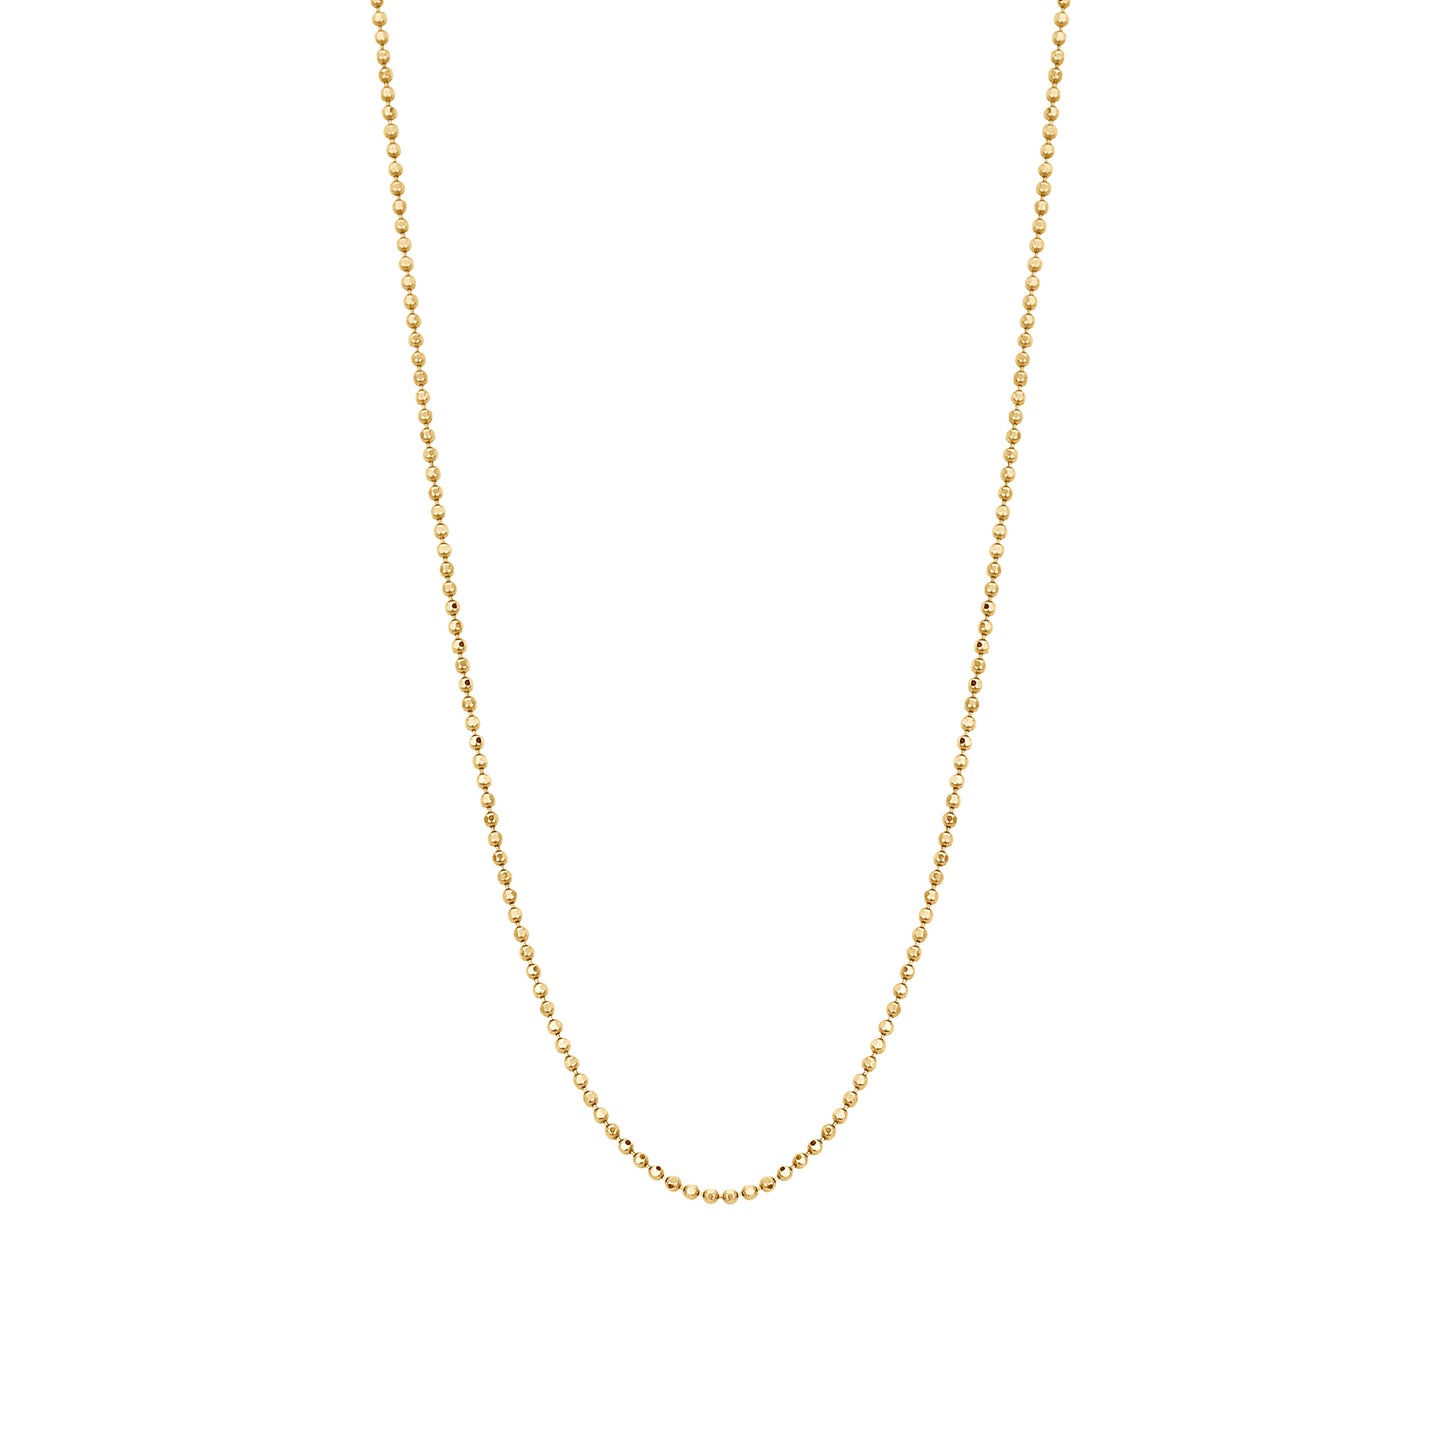 Small Ball Chain Necklace - 1.5 mm